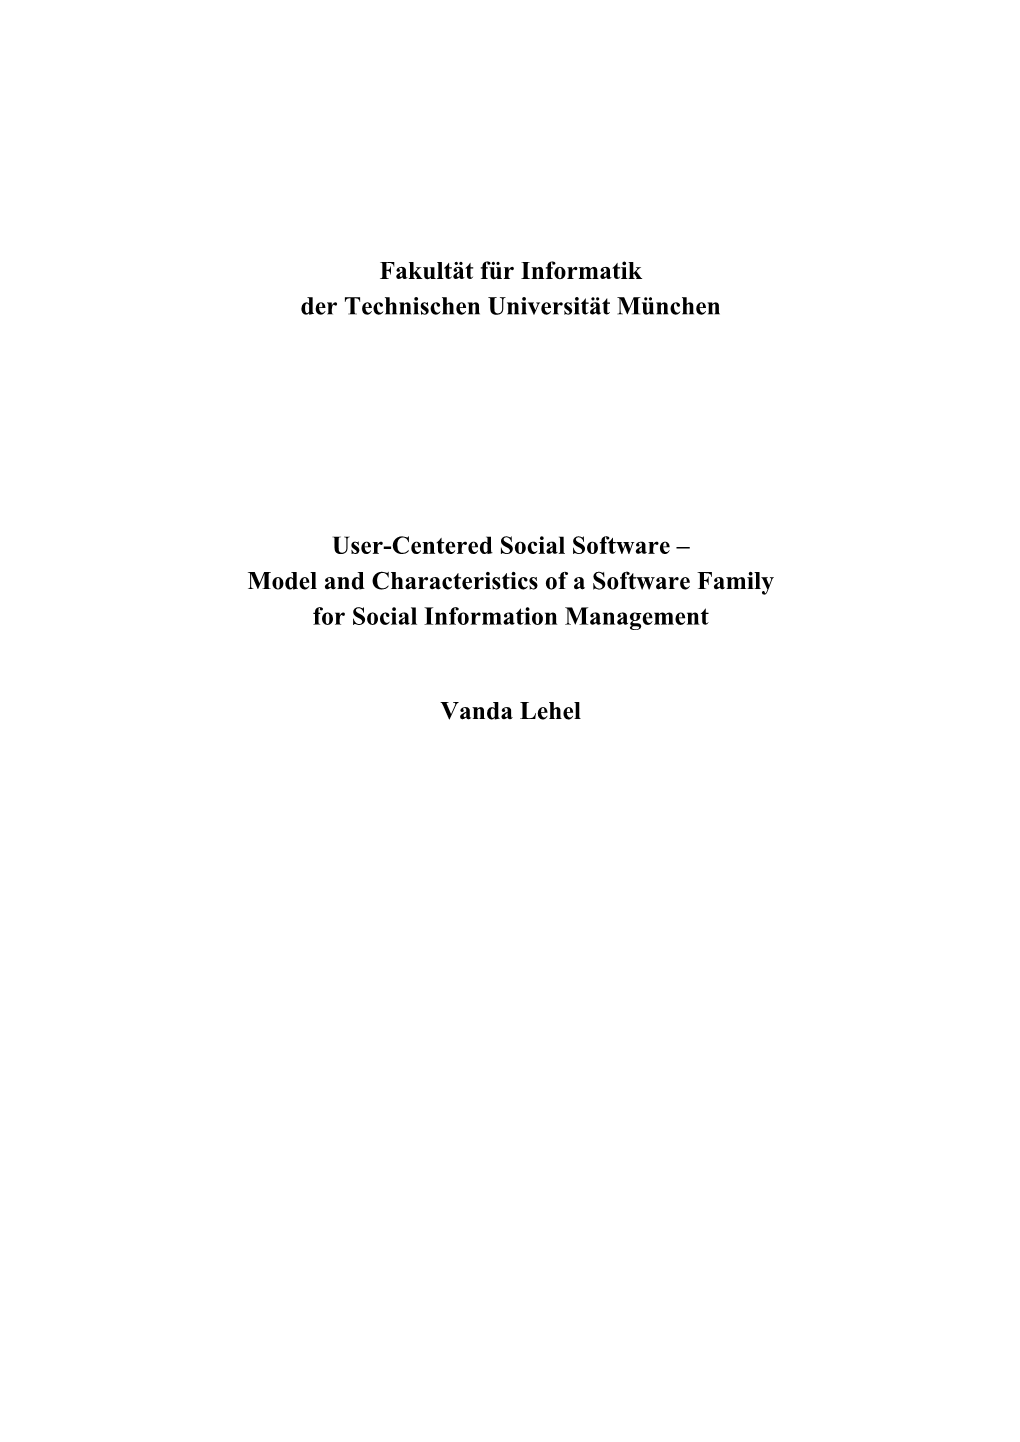 User-Centered Social Software – Model and Characteristics of a Software Family for Social Information Management